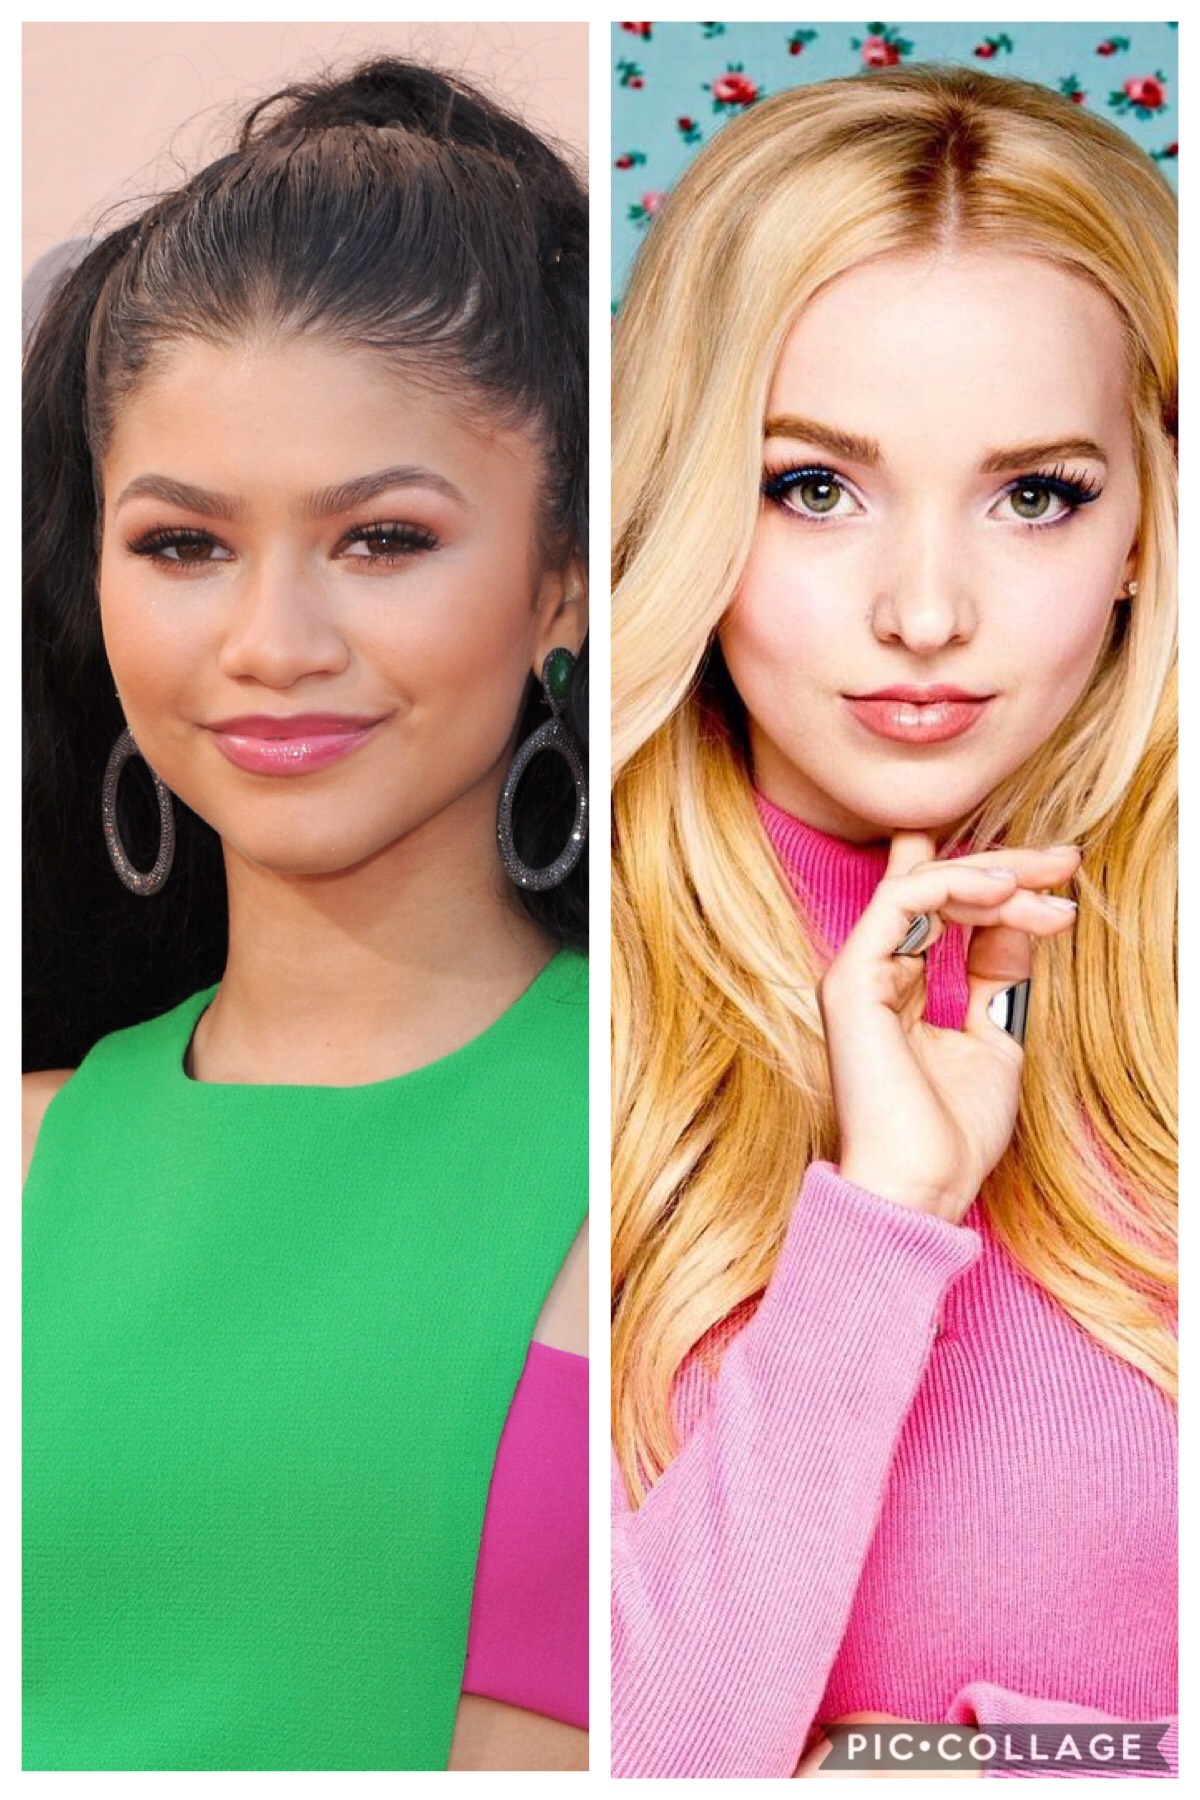 Zendaya or Dove camron who do you prefer please comment 